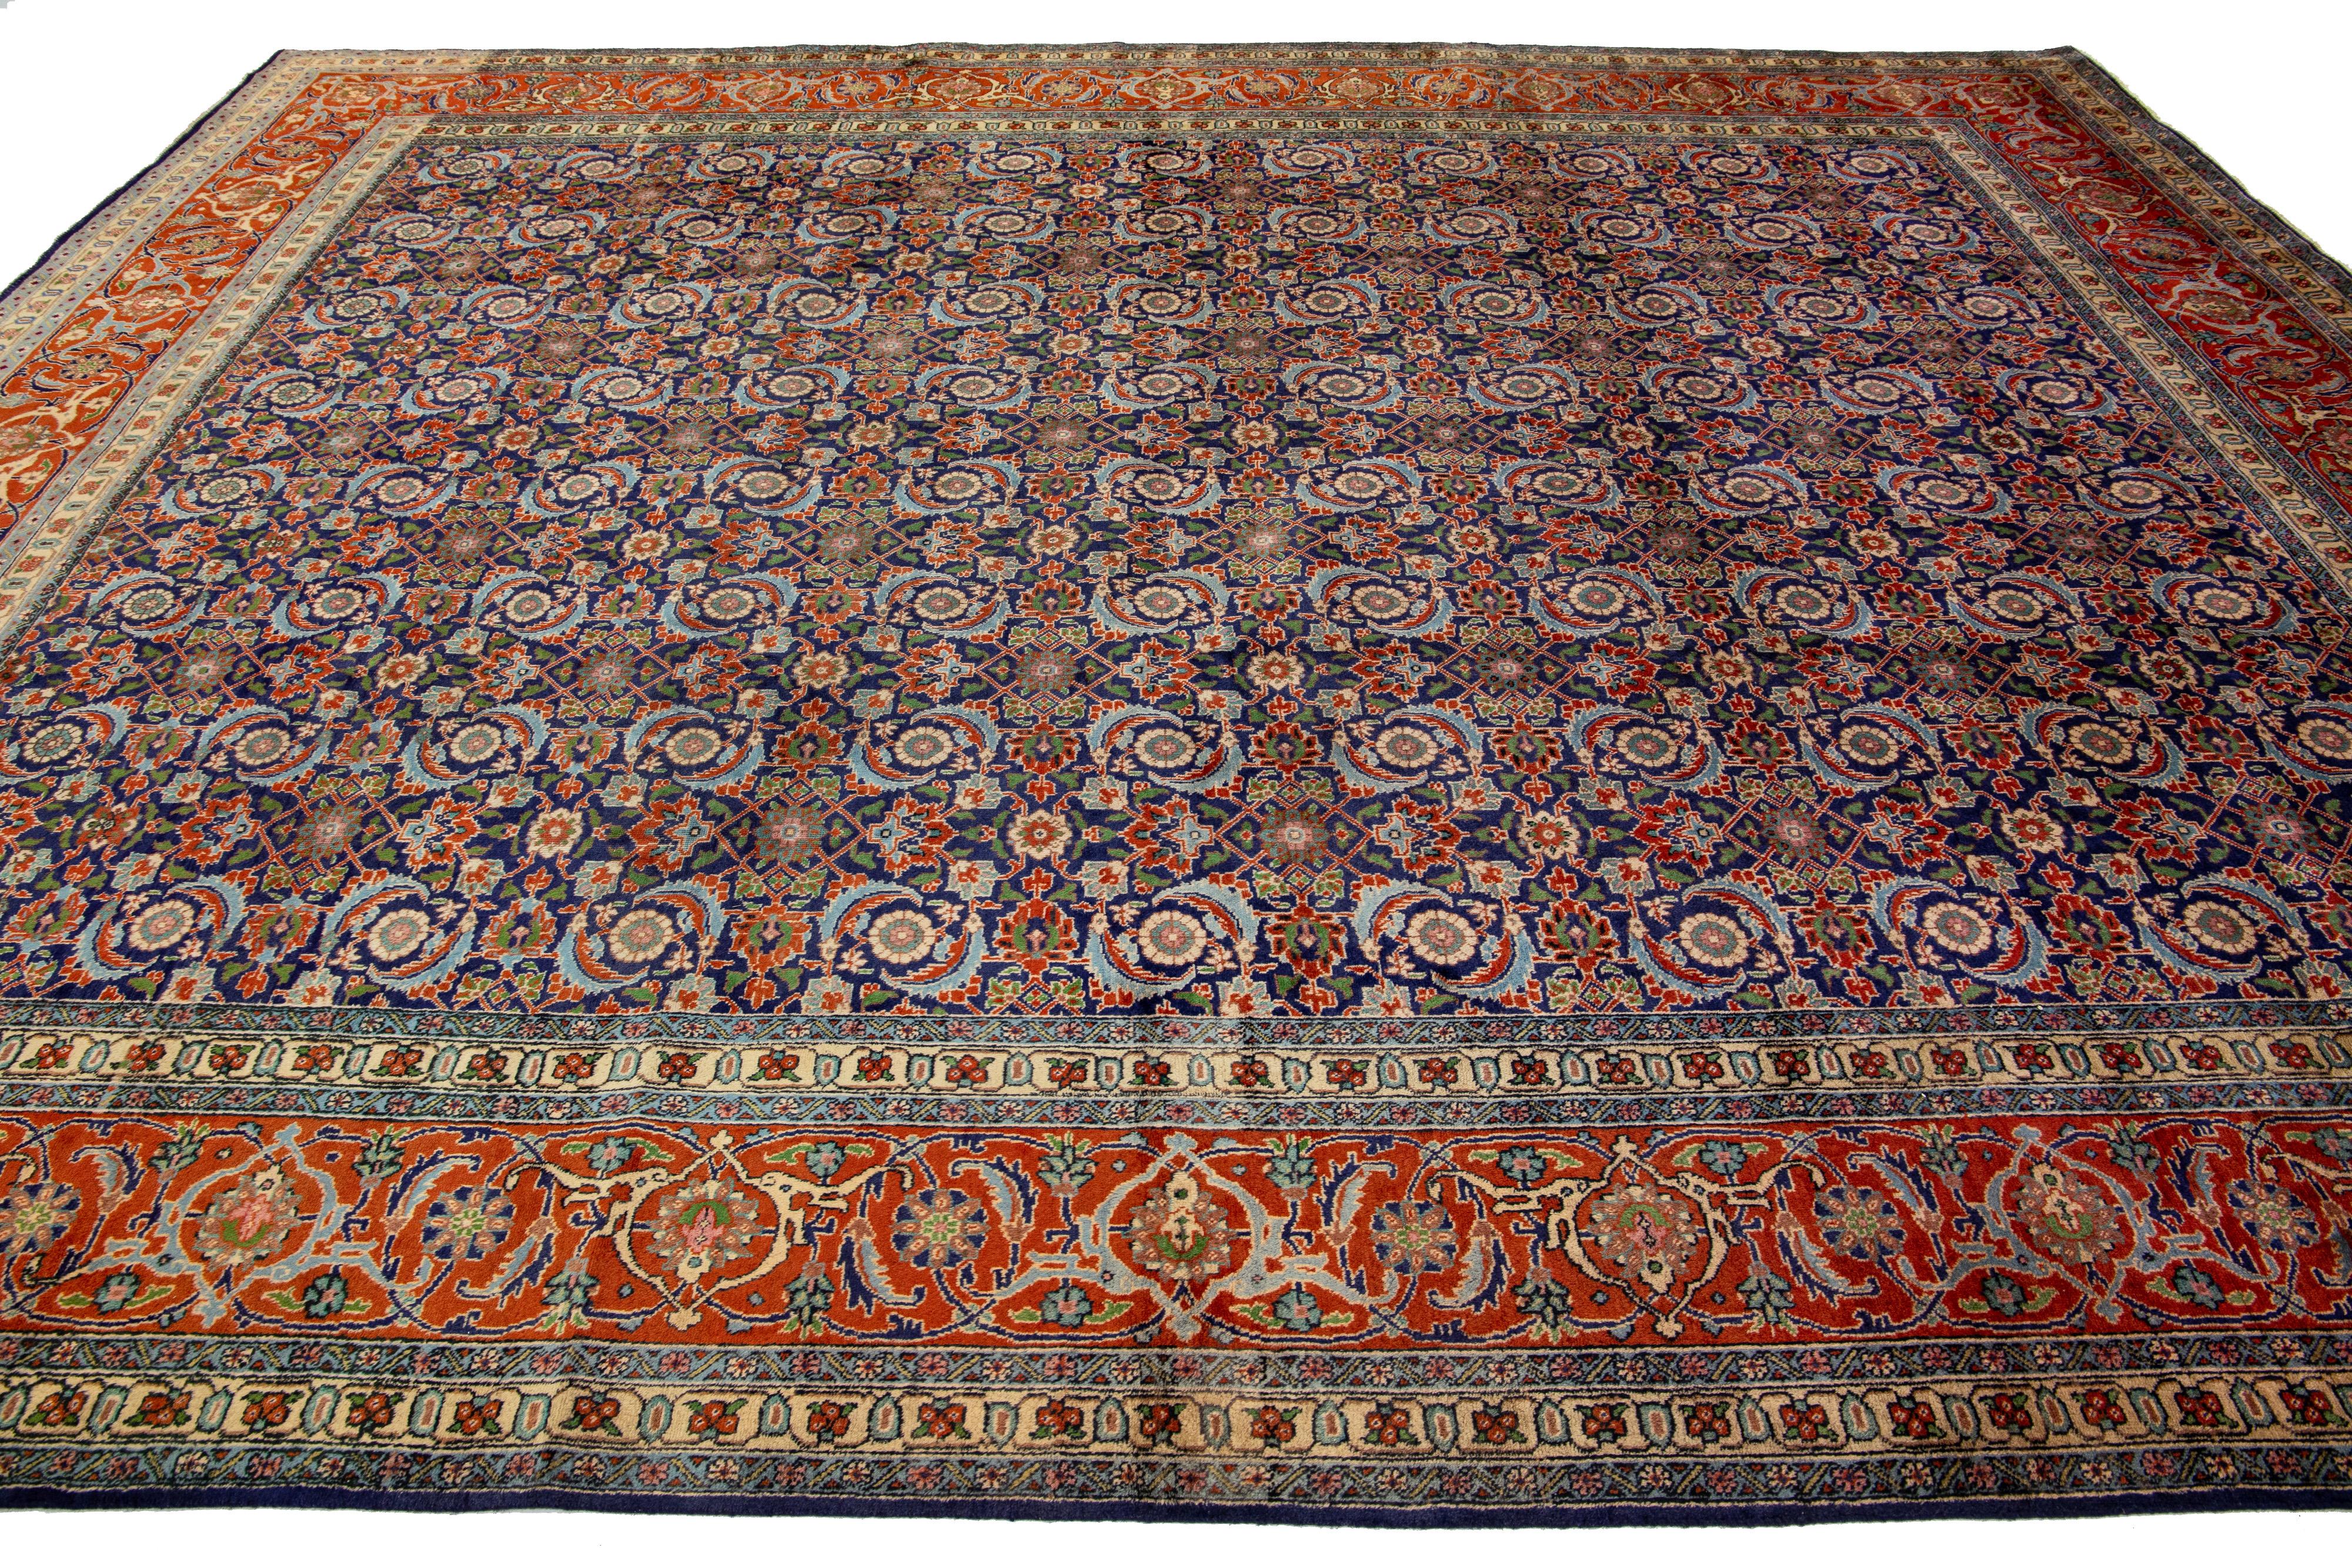 20th Century Blue and Orange Antique Wool Rug Persian Tabriz From 1920s with allover Design For Sale